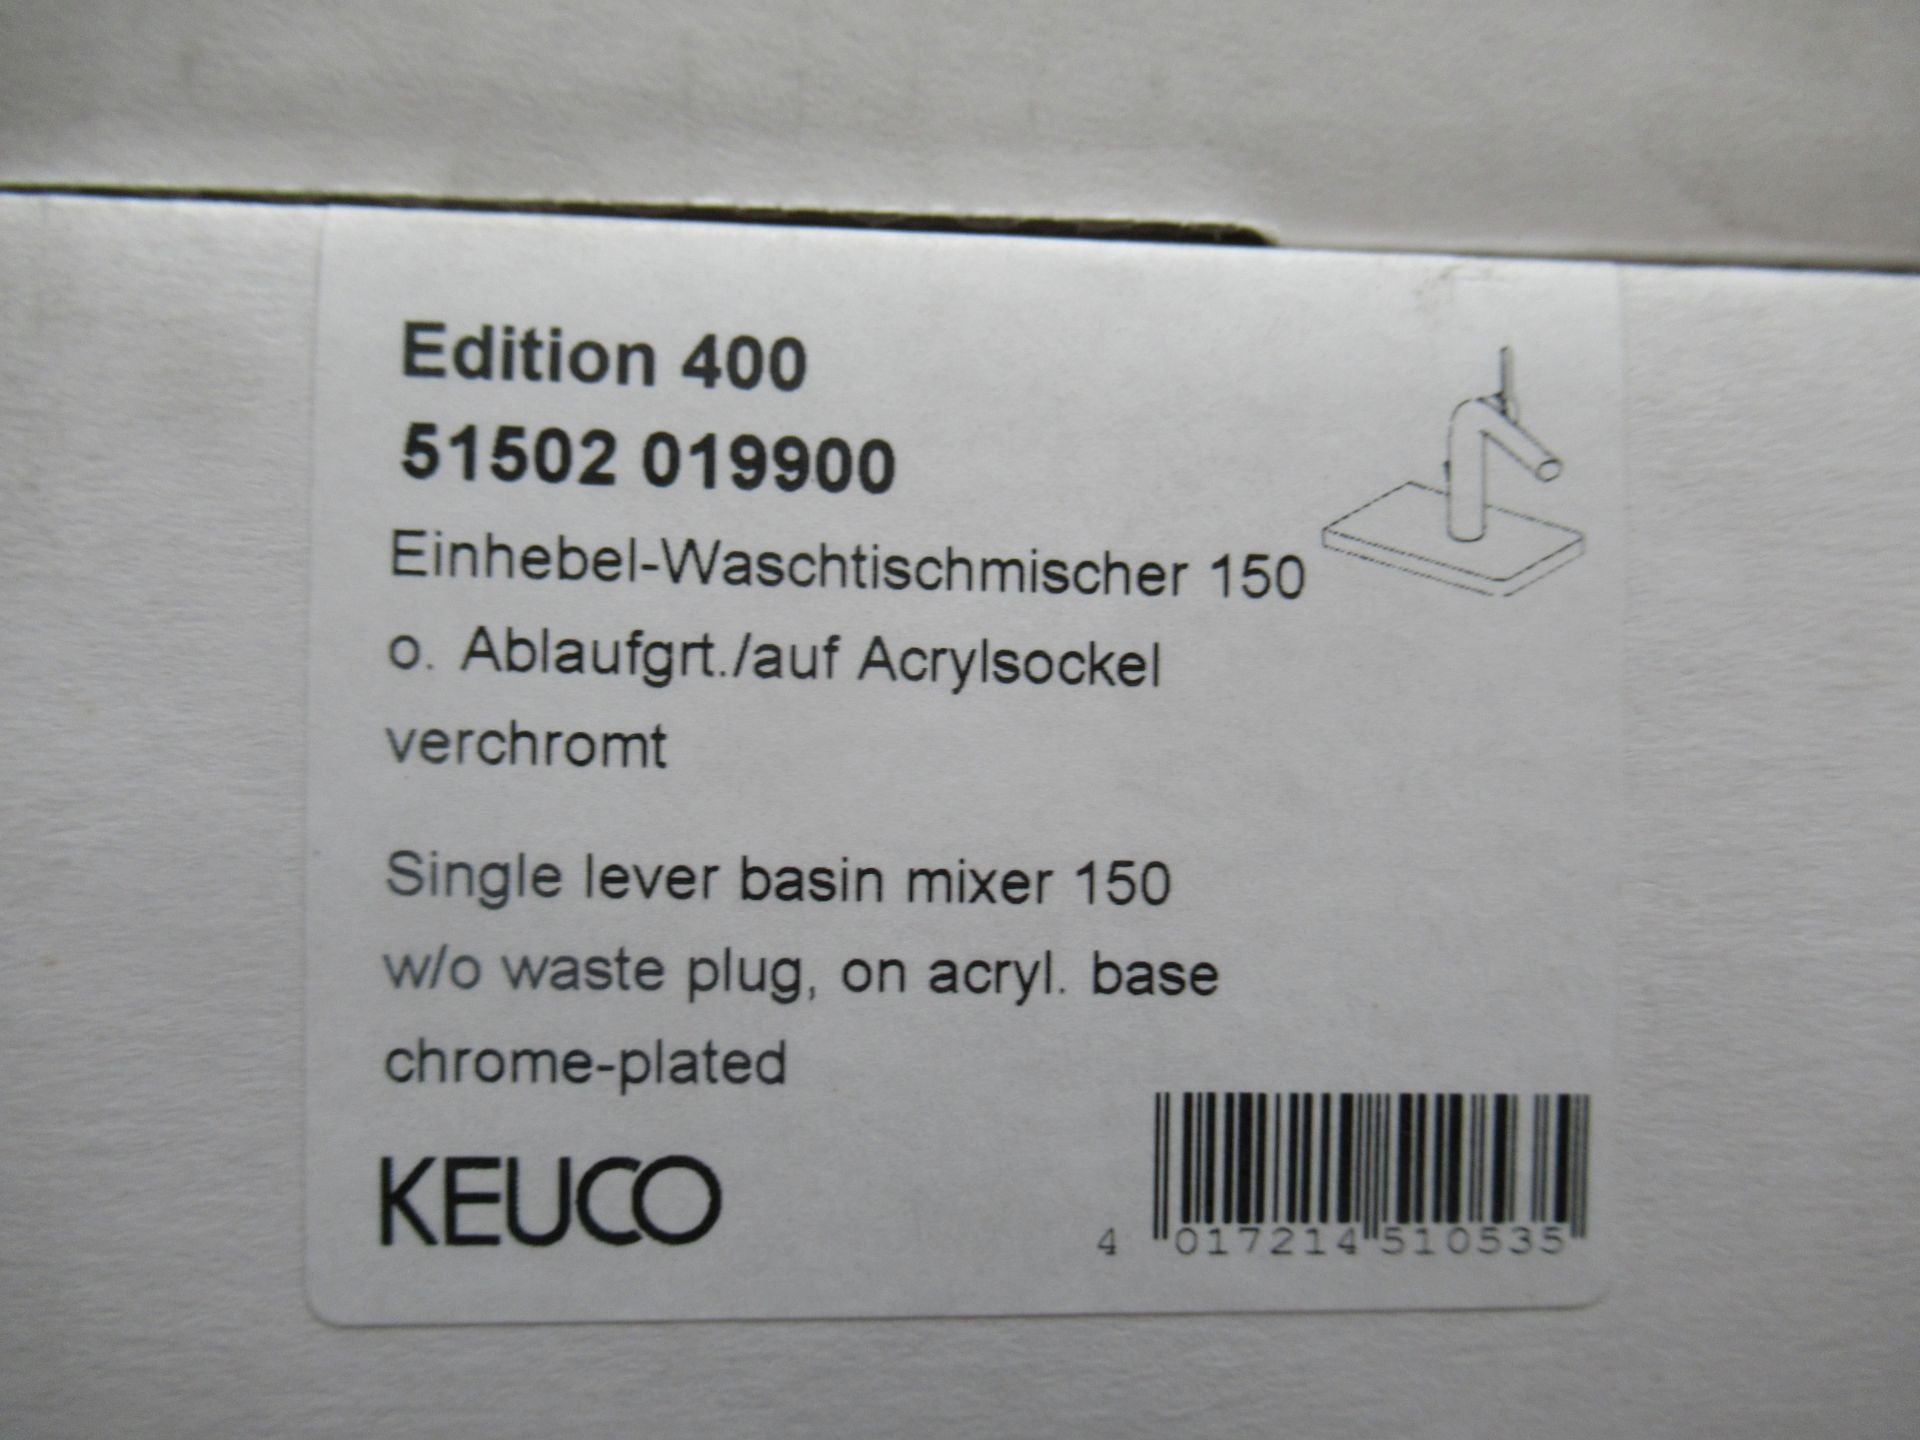 2 x Keuco Edition 400 Single Lever Basin Mixer 150-Tap, Chrome Plated, P/N 51502-019900 - Image 2 of 3